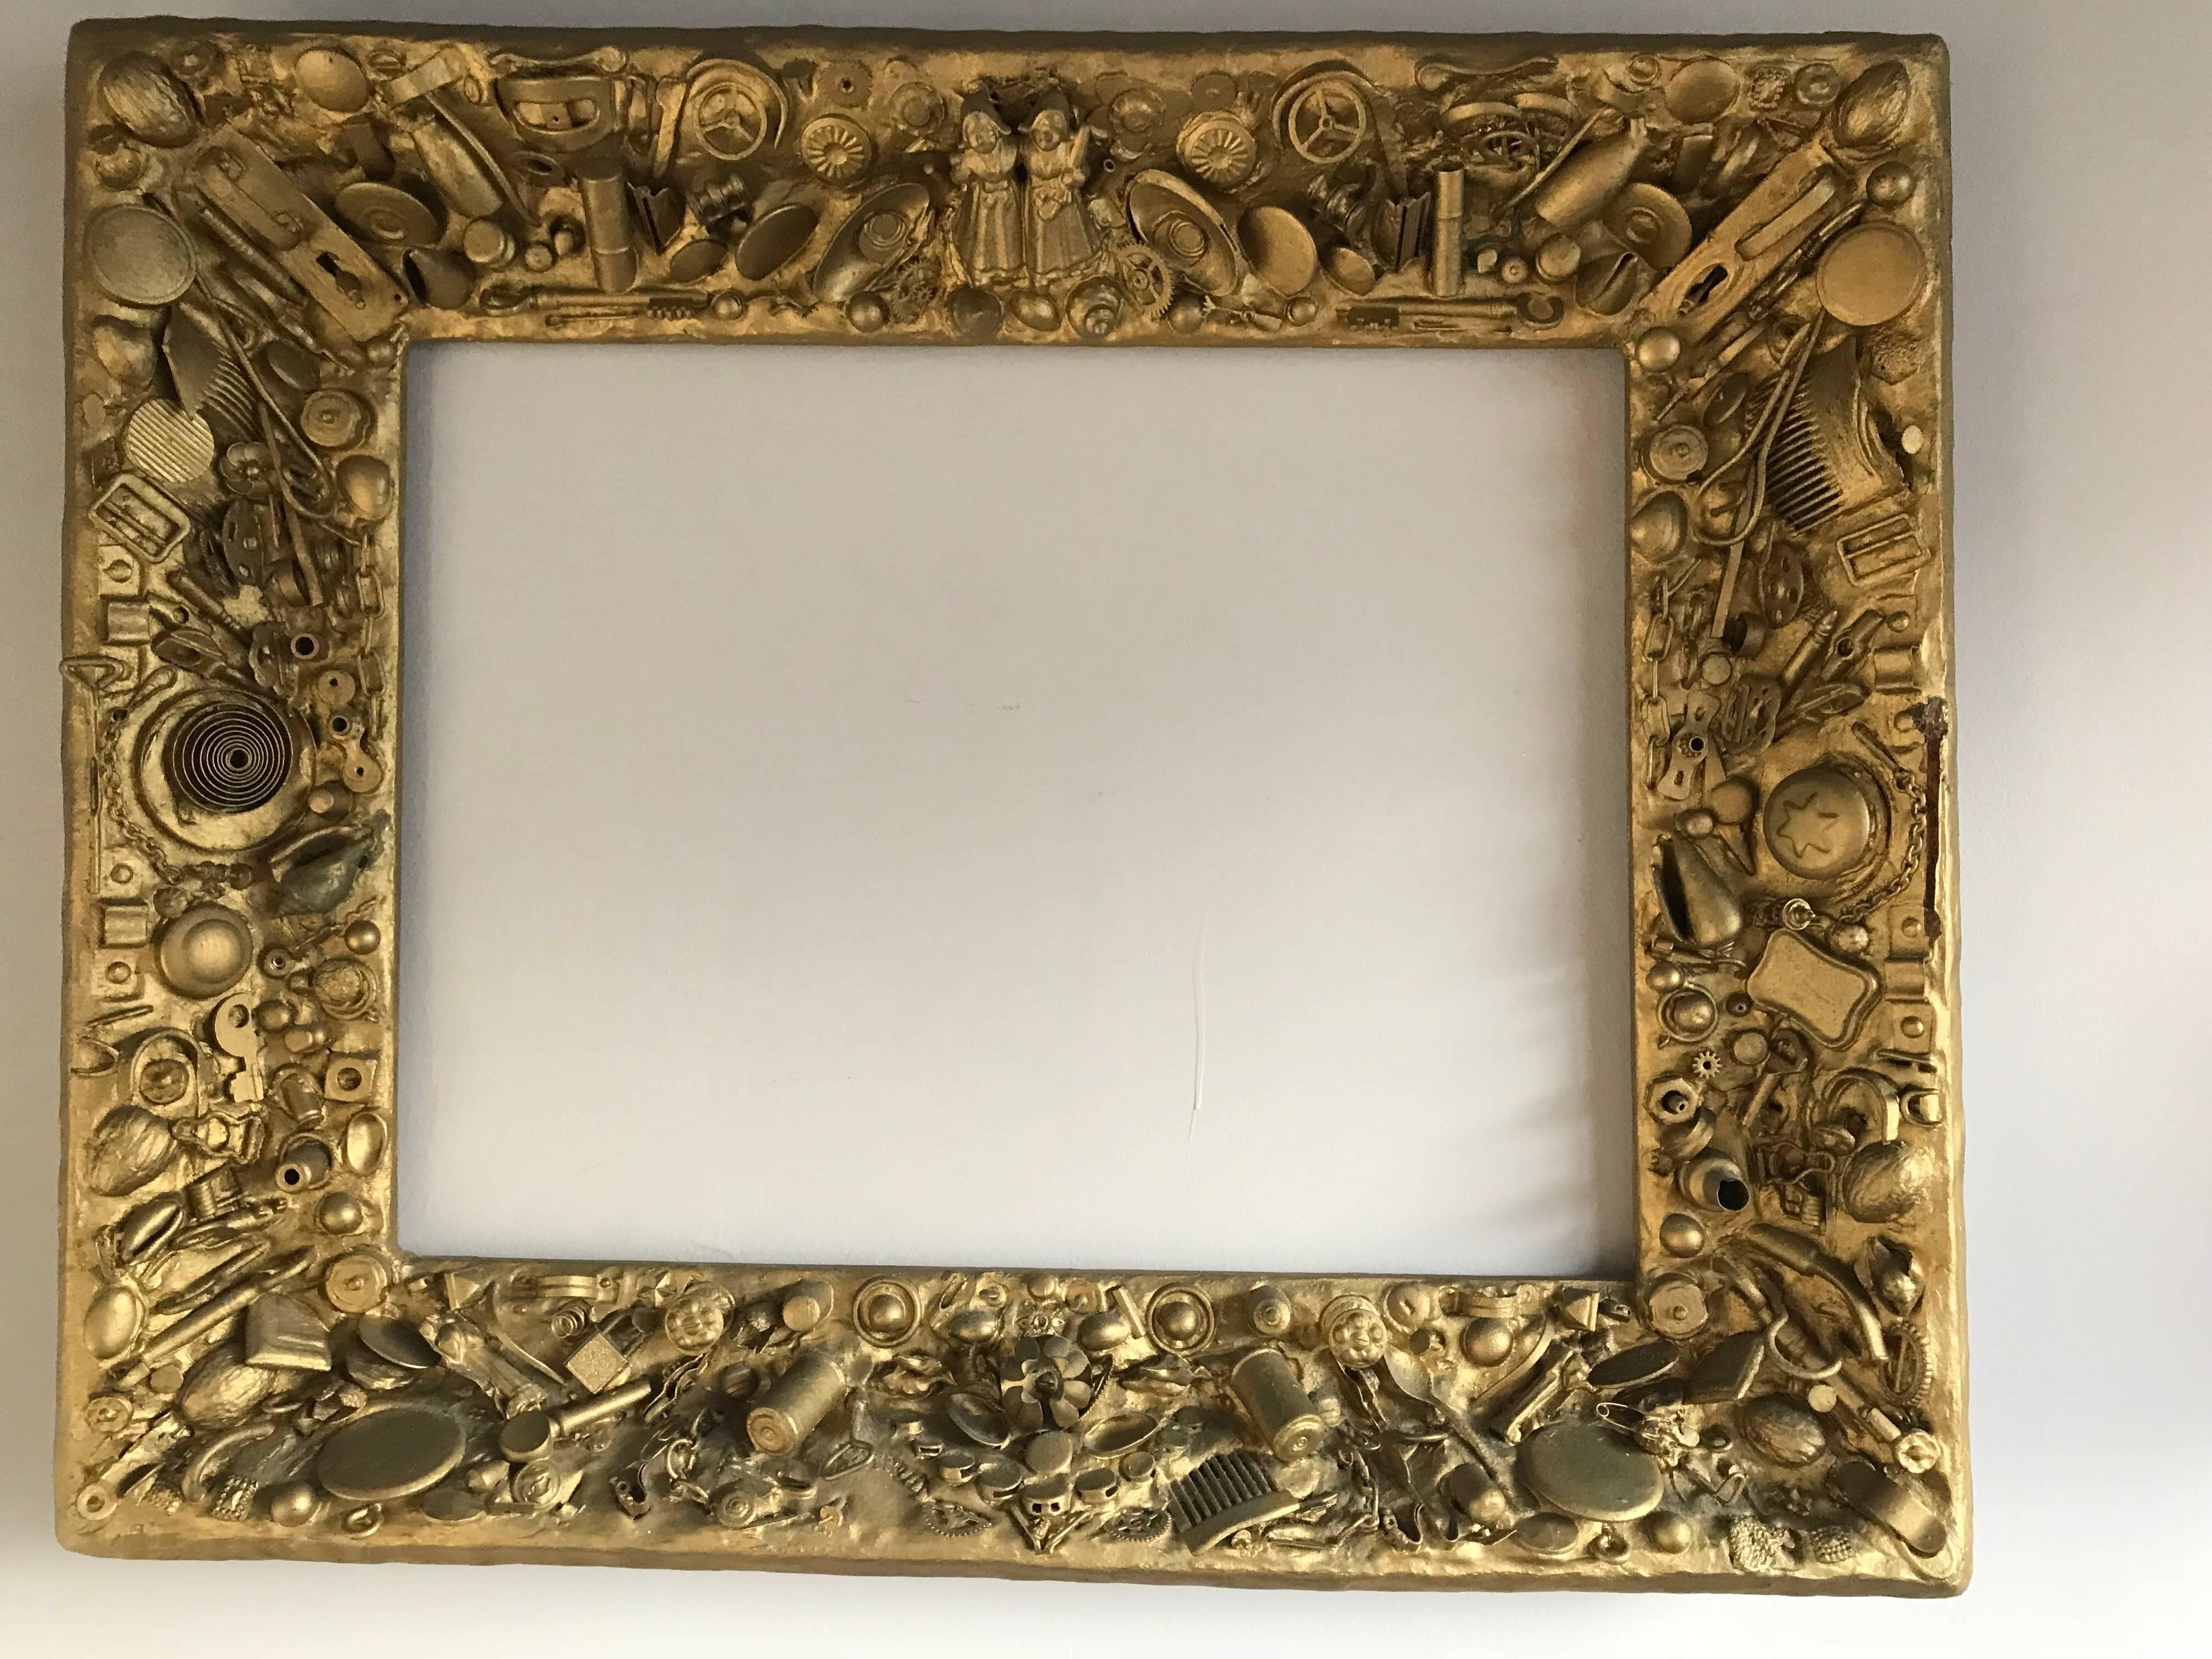 One of a kind artwork picture or mirror frame.

This unique work of wall-art never seizes to draw your attention. Everytime you look at it, you will discover something new, because there is so much going on. The beauty and originality in this modern